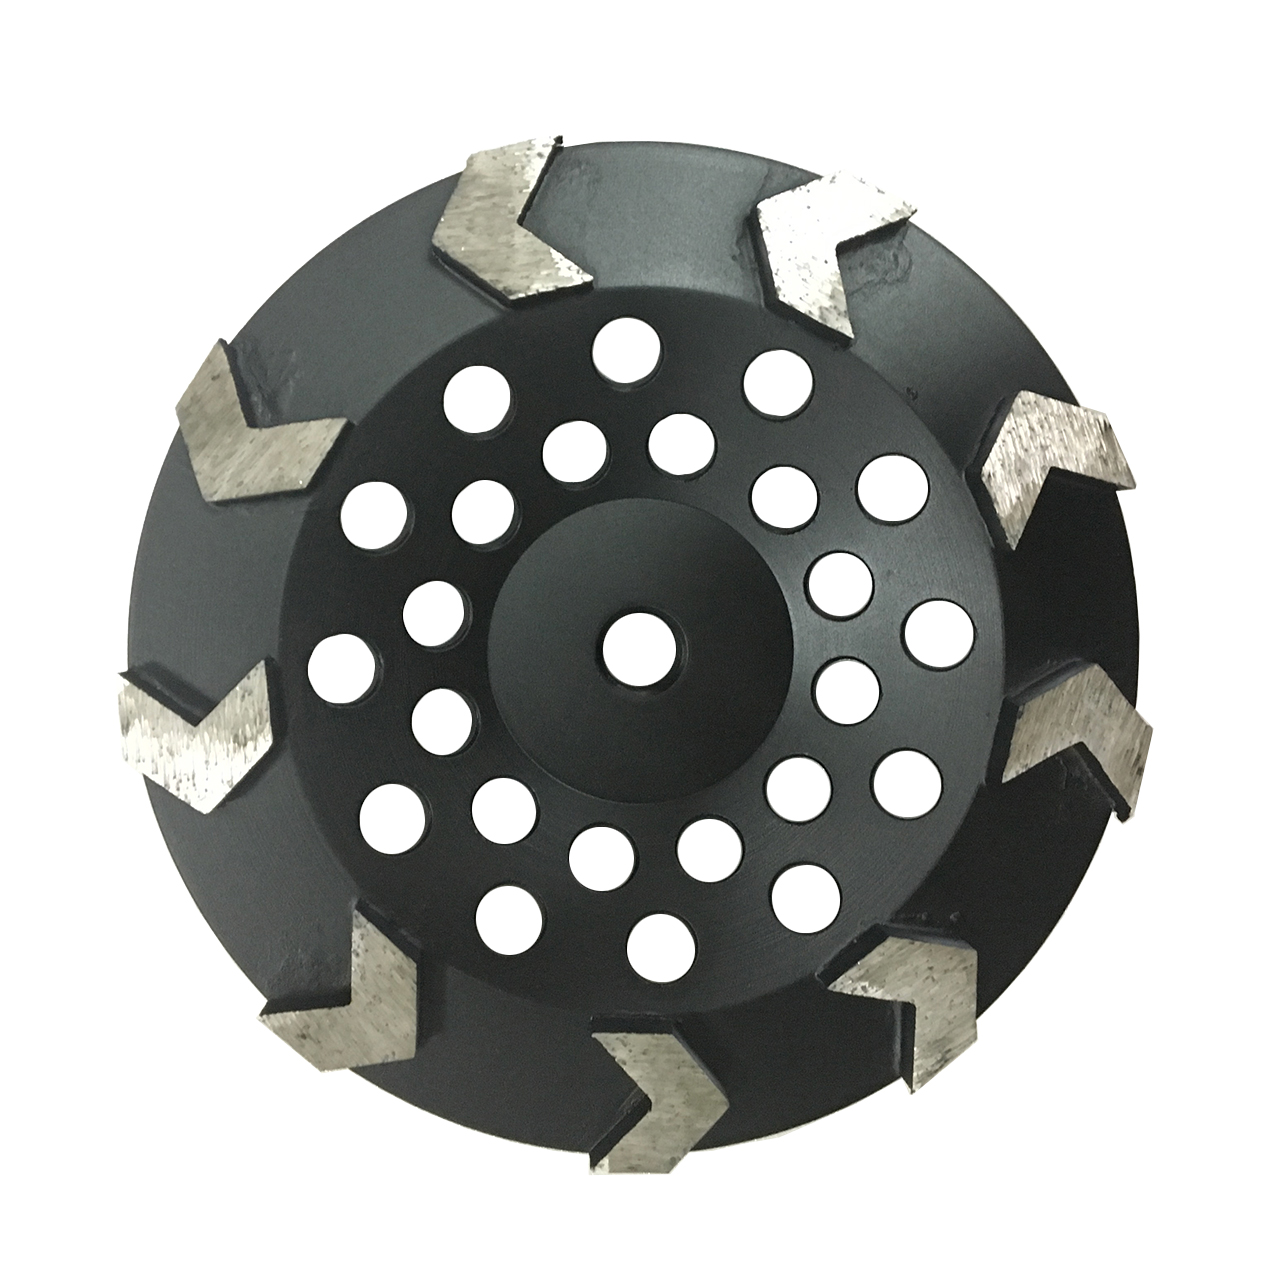 7''/180mm Diamond Grinding Cup Wheels with 9 Arrow Segments (CW-A9)